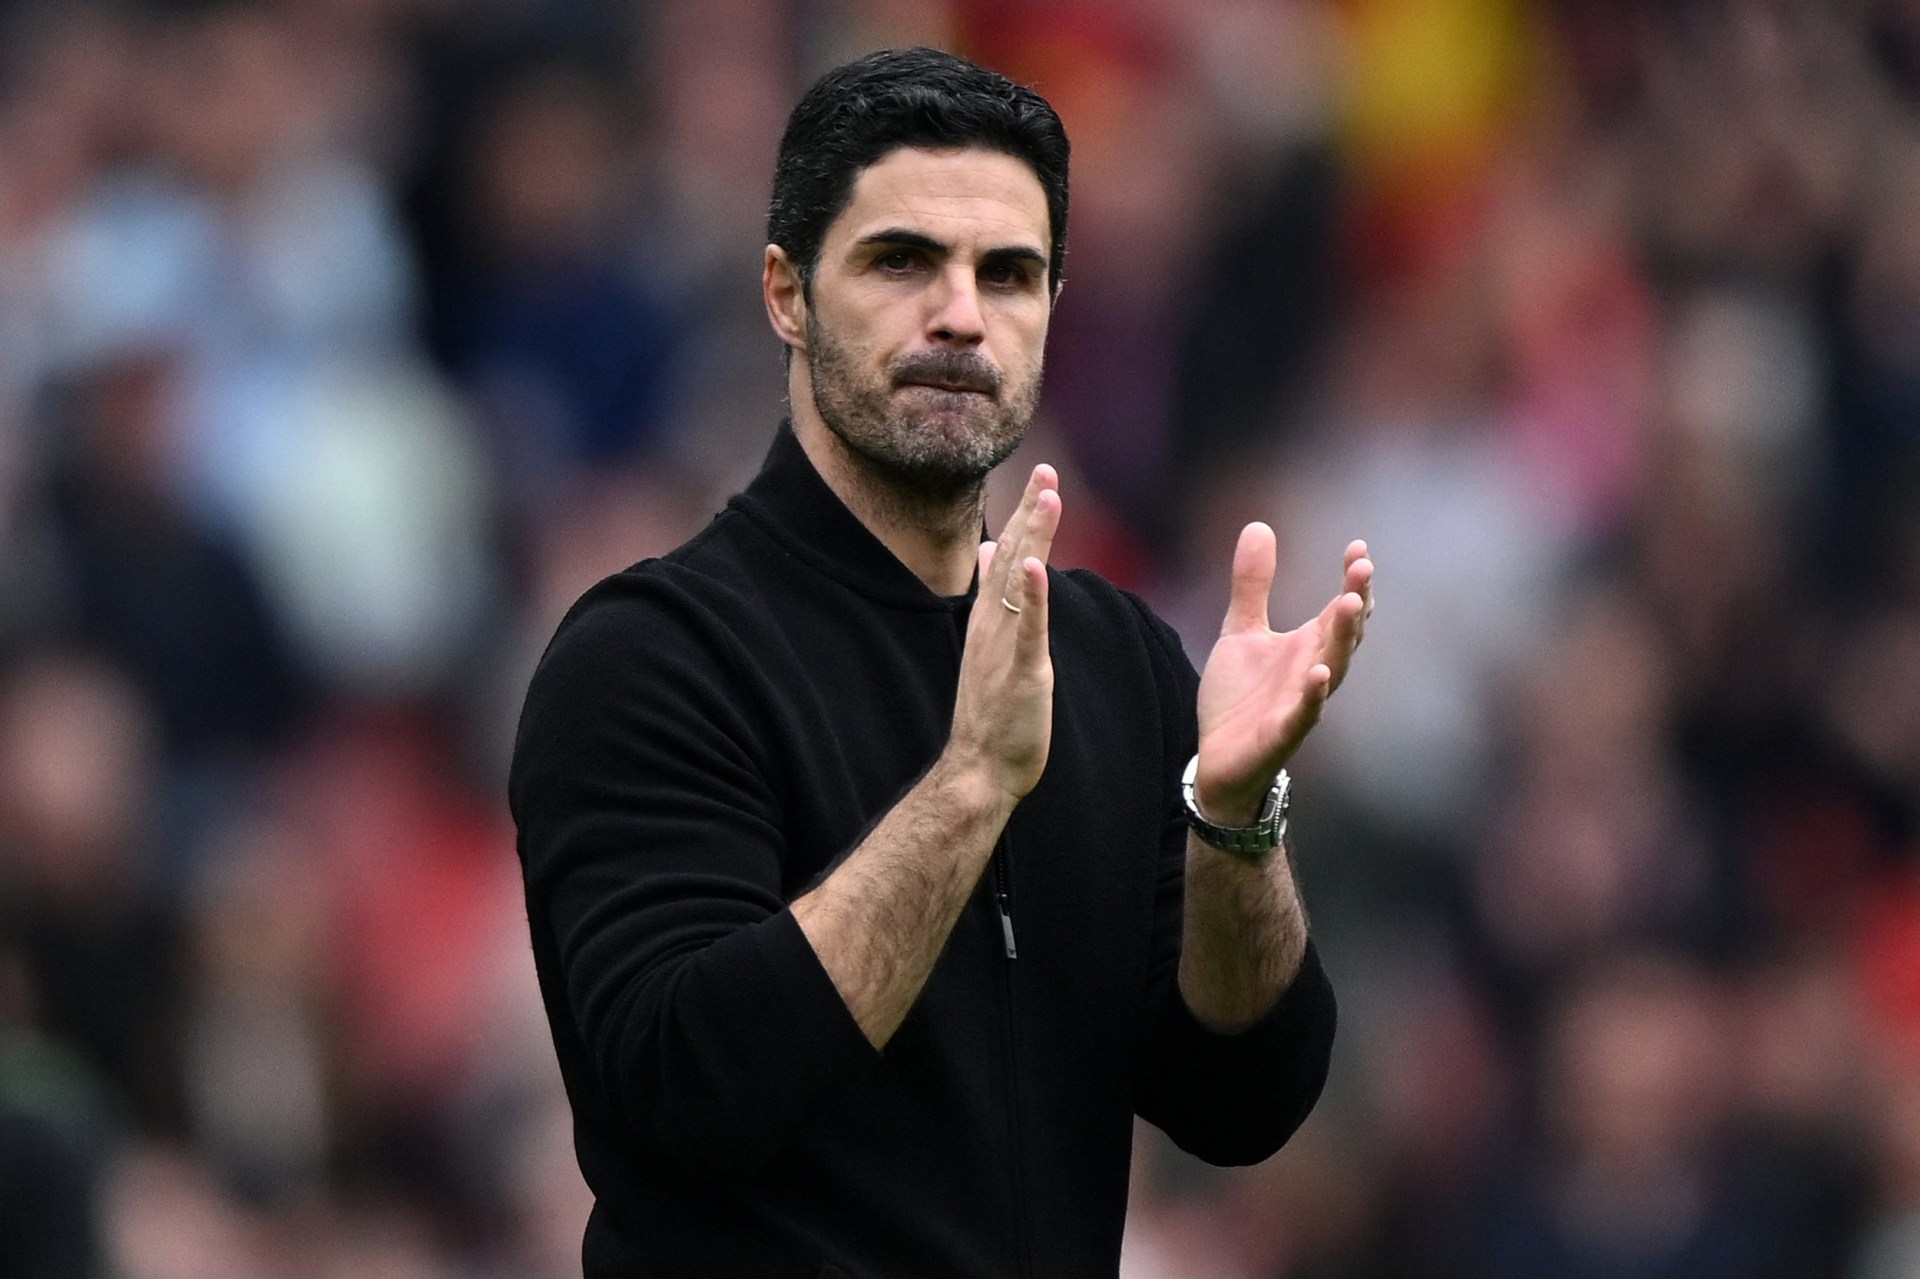 mikel arteta names arsenal star with 'different edge' after afc bournemouth win